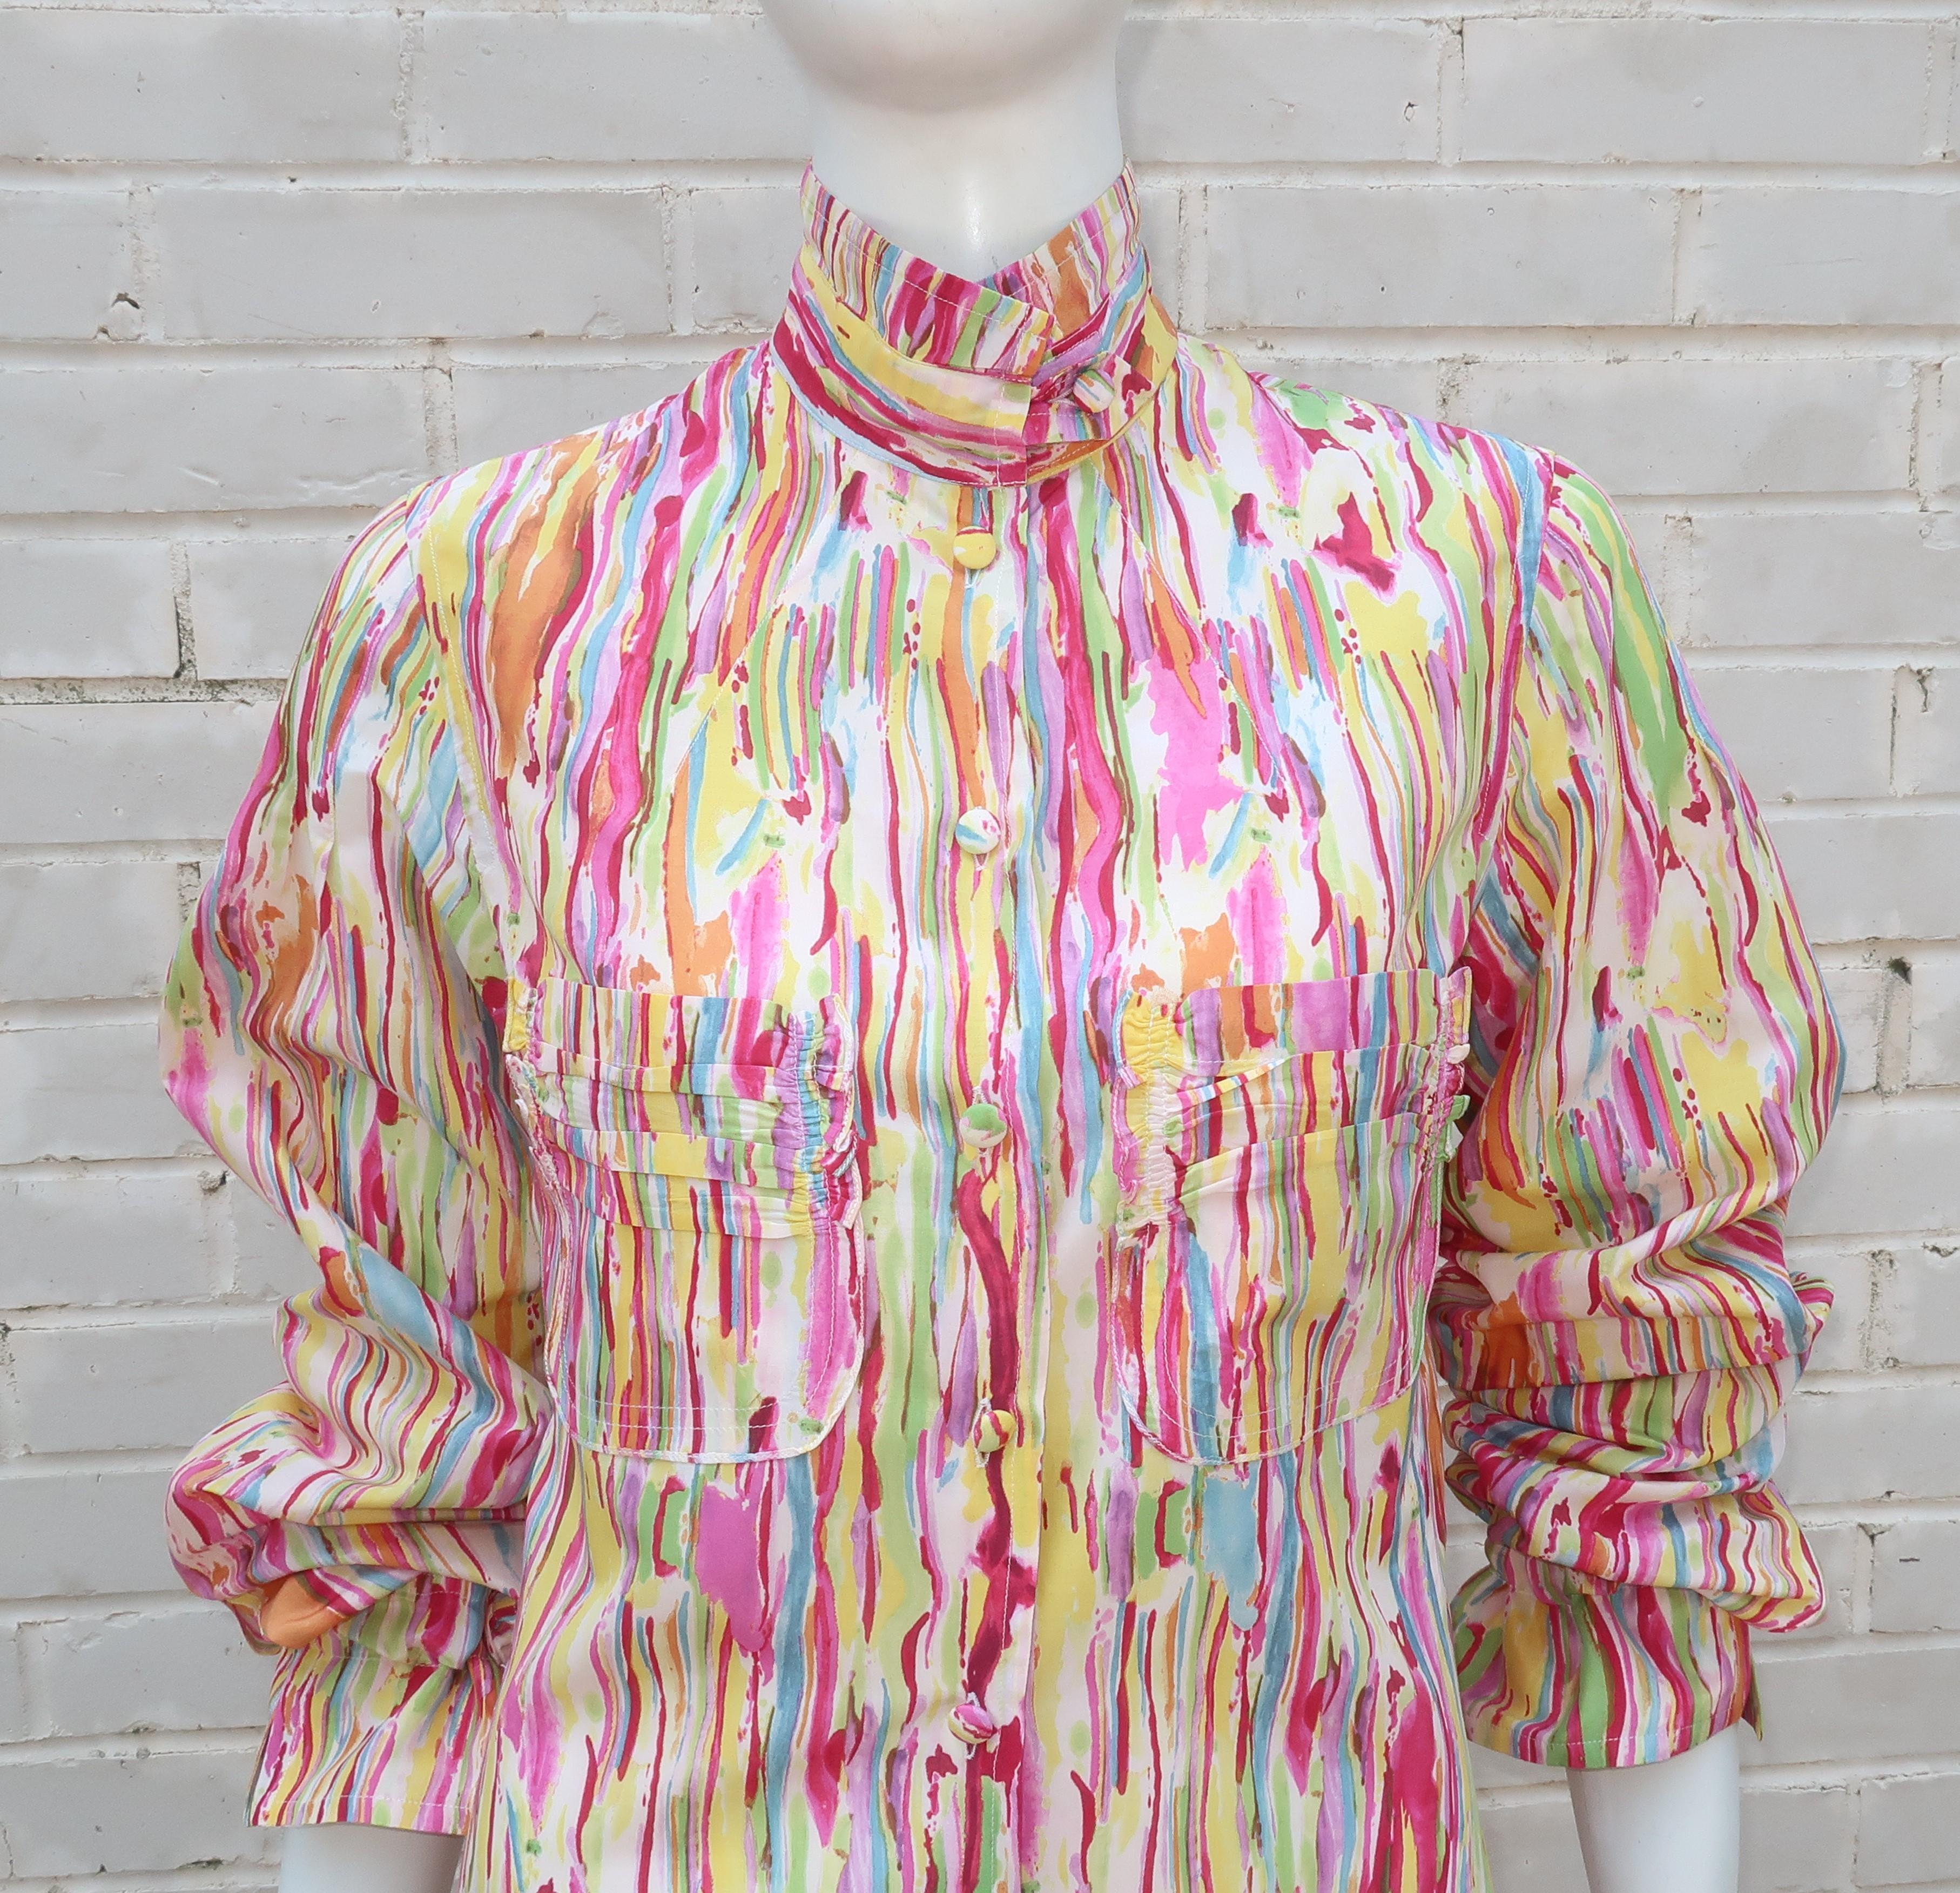 An Yves Saint Laurent silk blouse with an abstract pattern in shades of fuchsia, lilac, green, yellow, orange and white all resembling a cheerful watercolor painting.  The details add to the fun including pin tucking at the upper sleeves, ruched